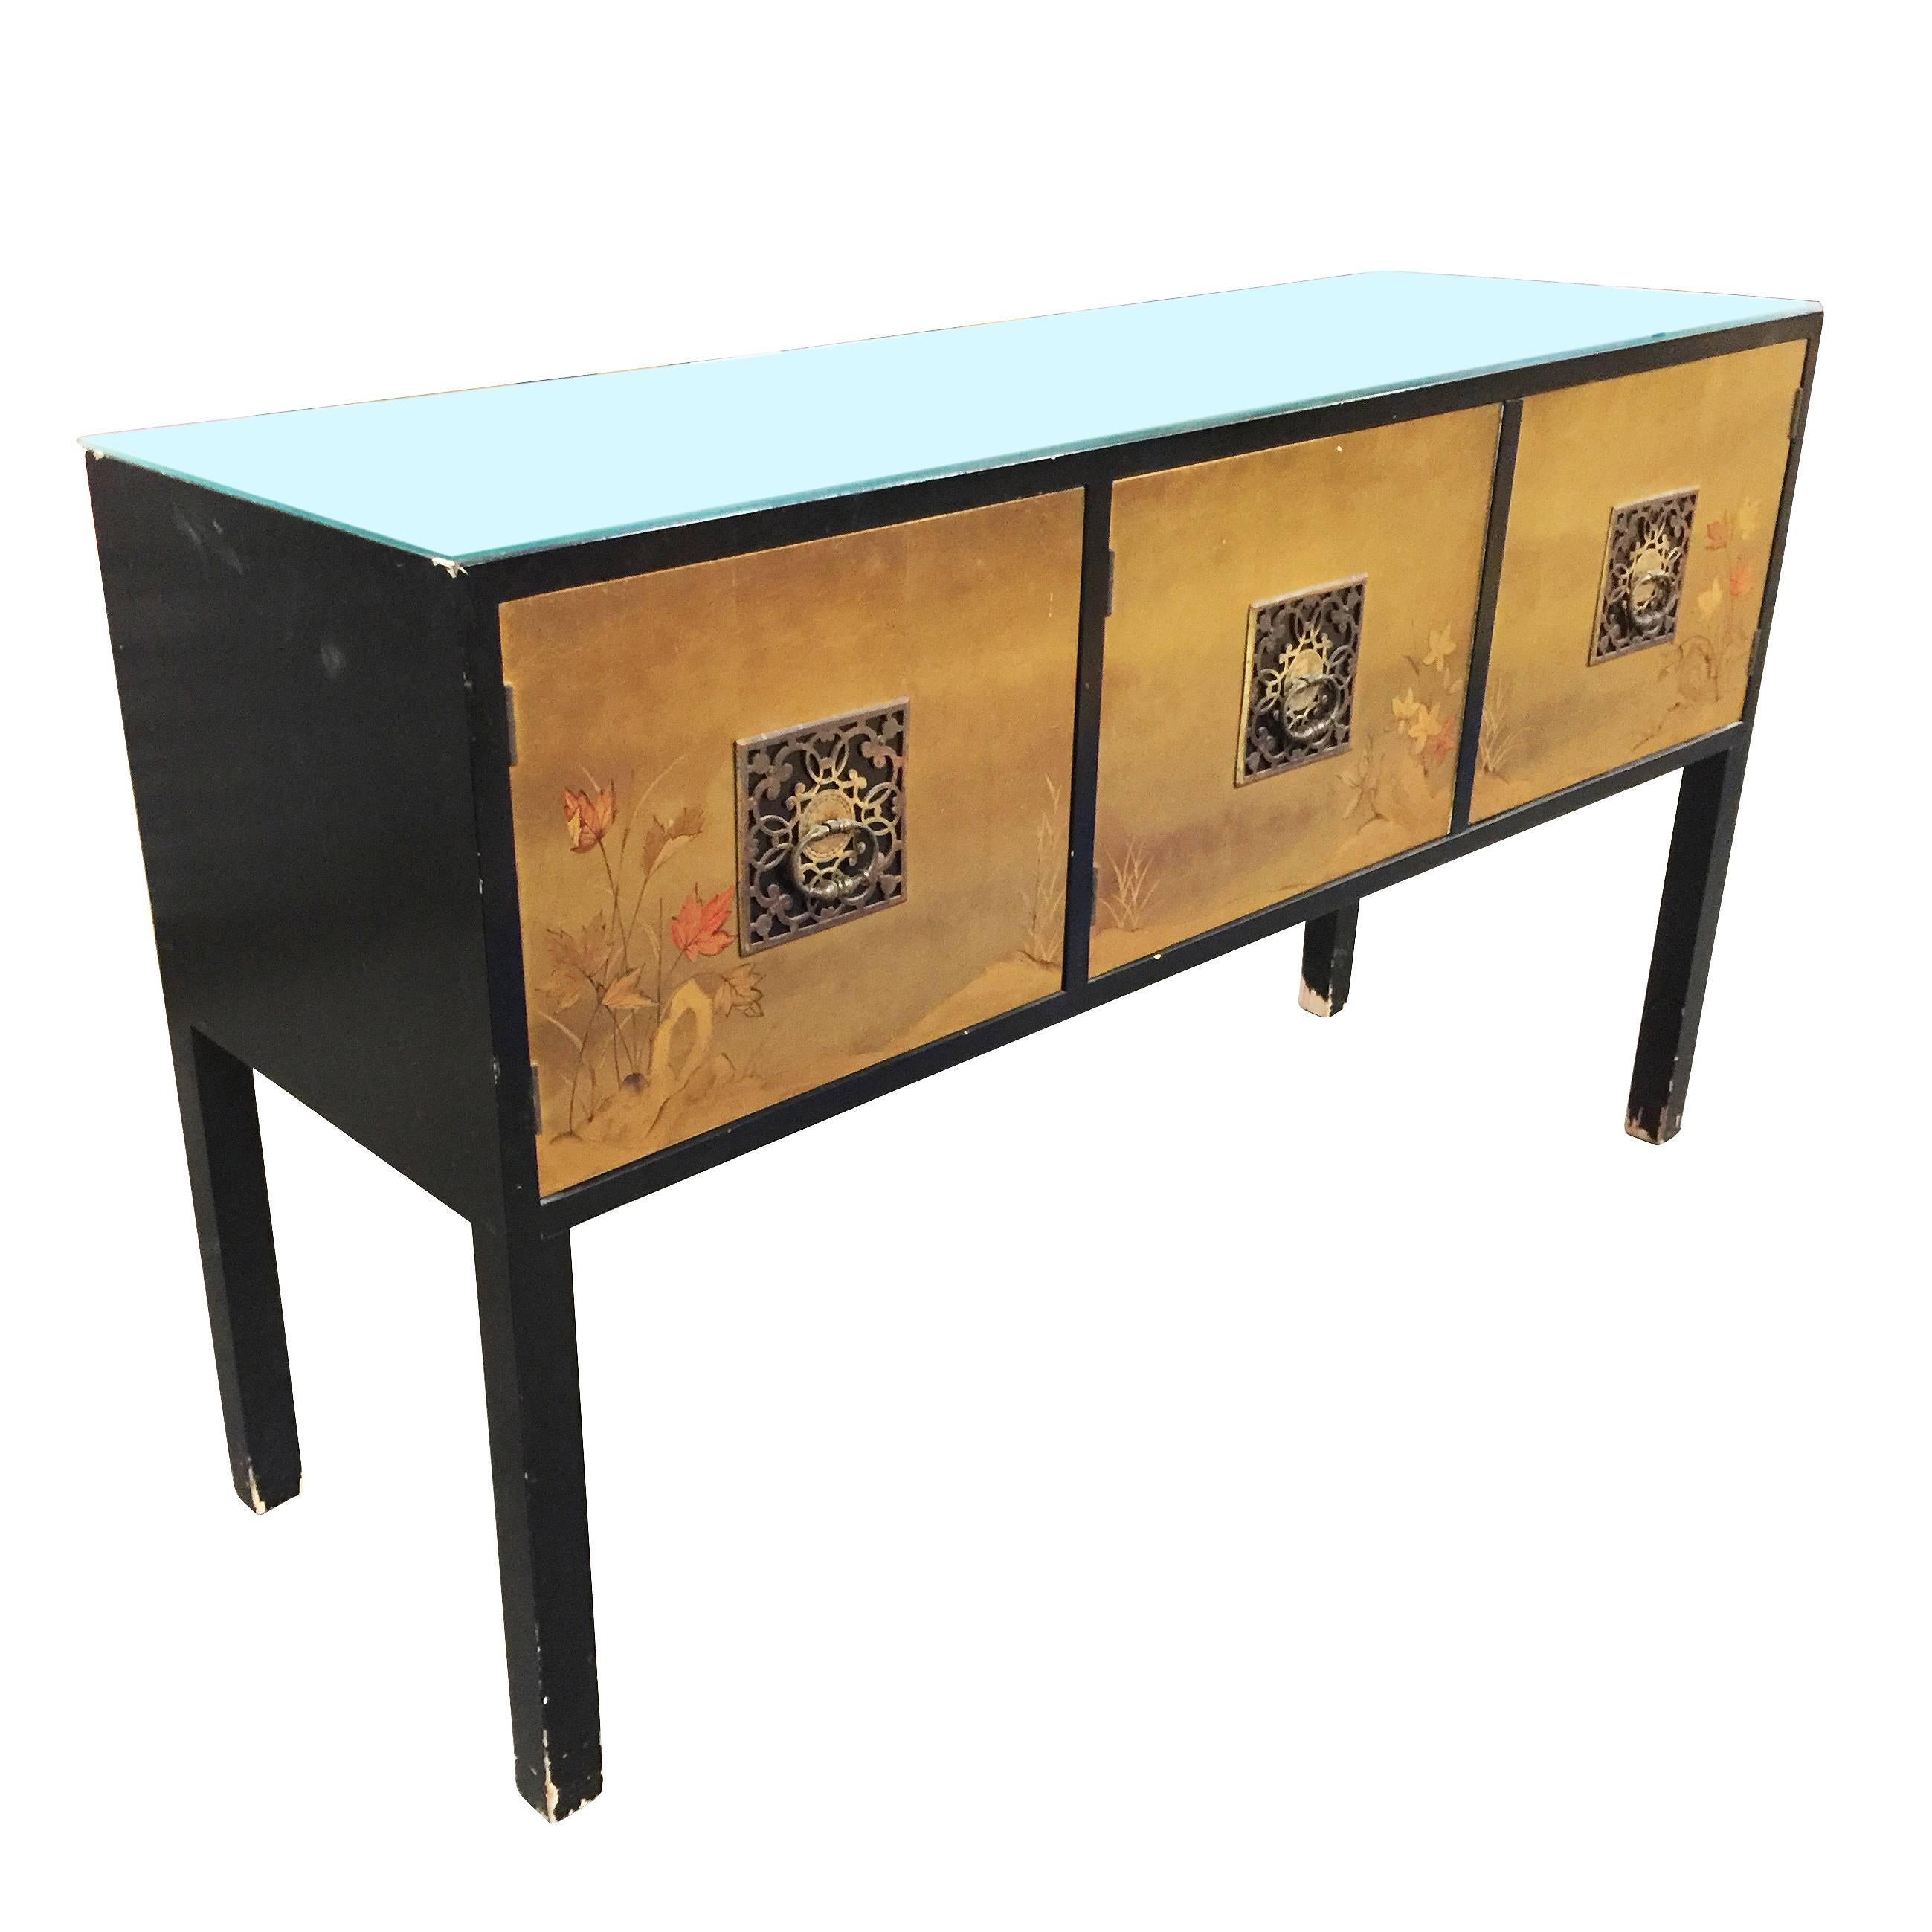 Asian inspired console cabinet with black lacquer body and hand-painted doors and bronze pulls along the front. The form and styling were inspired by the Asian influenced midcentury styling made famous by James Mont. 

The cabinet features three